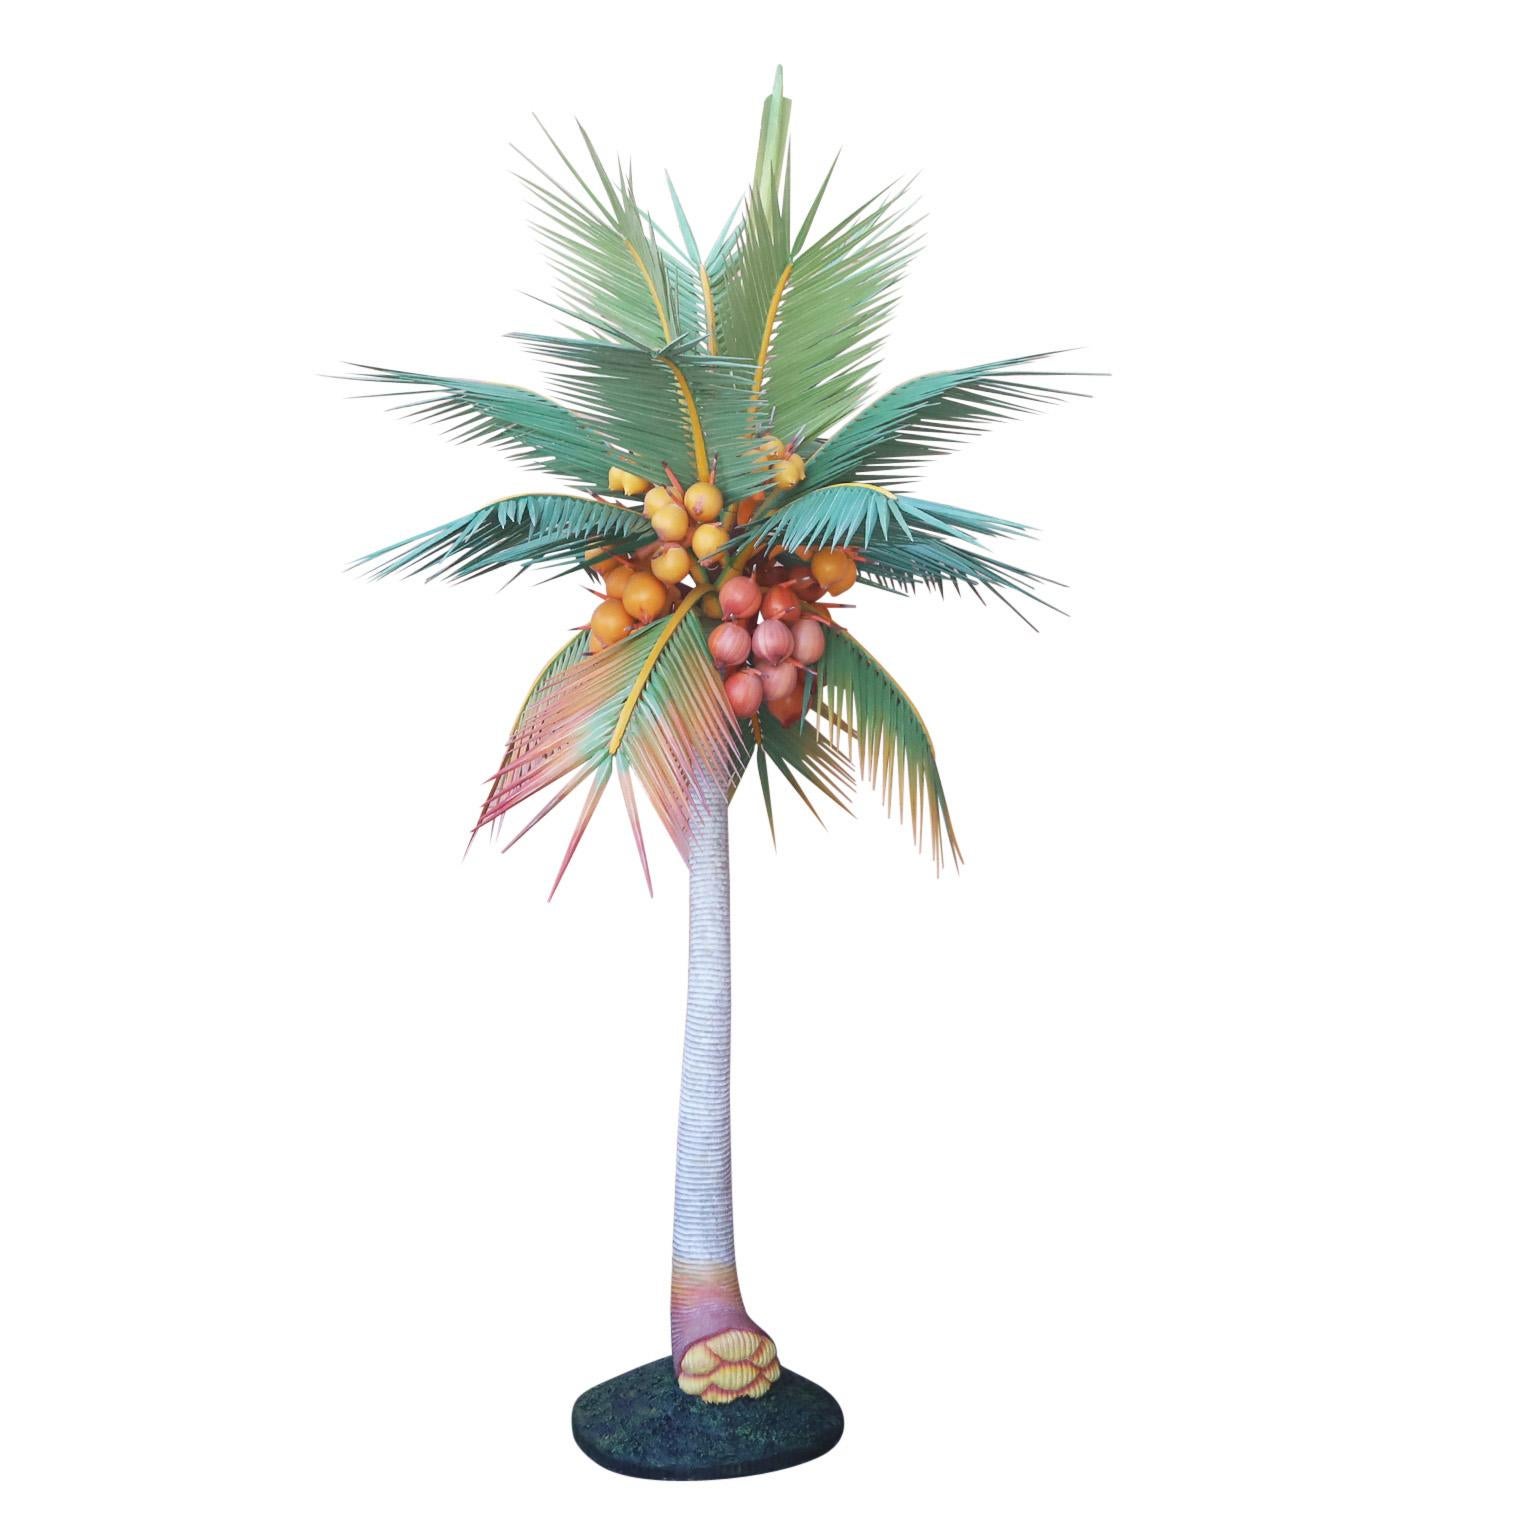 Extraordinary tall vintage palm tree sculpture handcrafted in wood carved and paint decorated with leaves, coconuts, trunk, and weighted terra firma base.